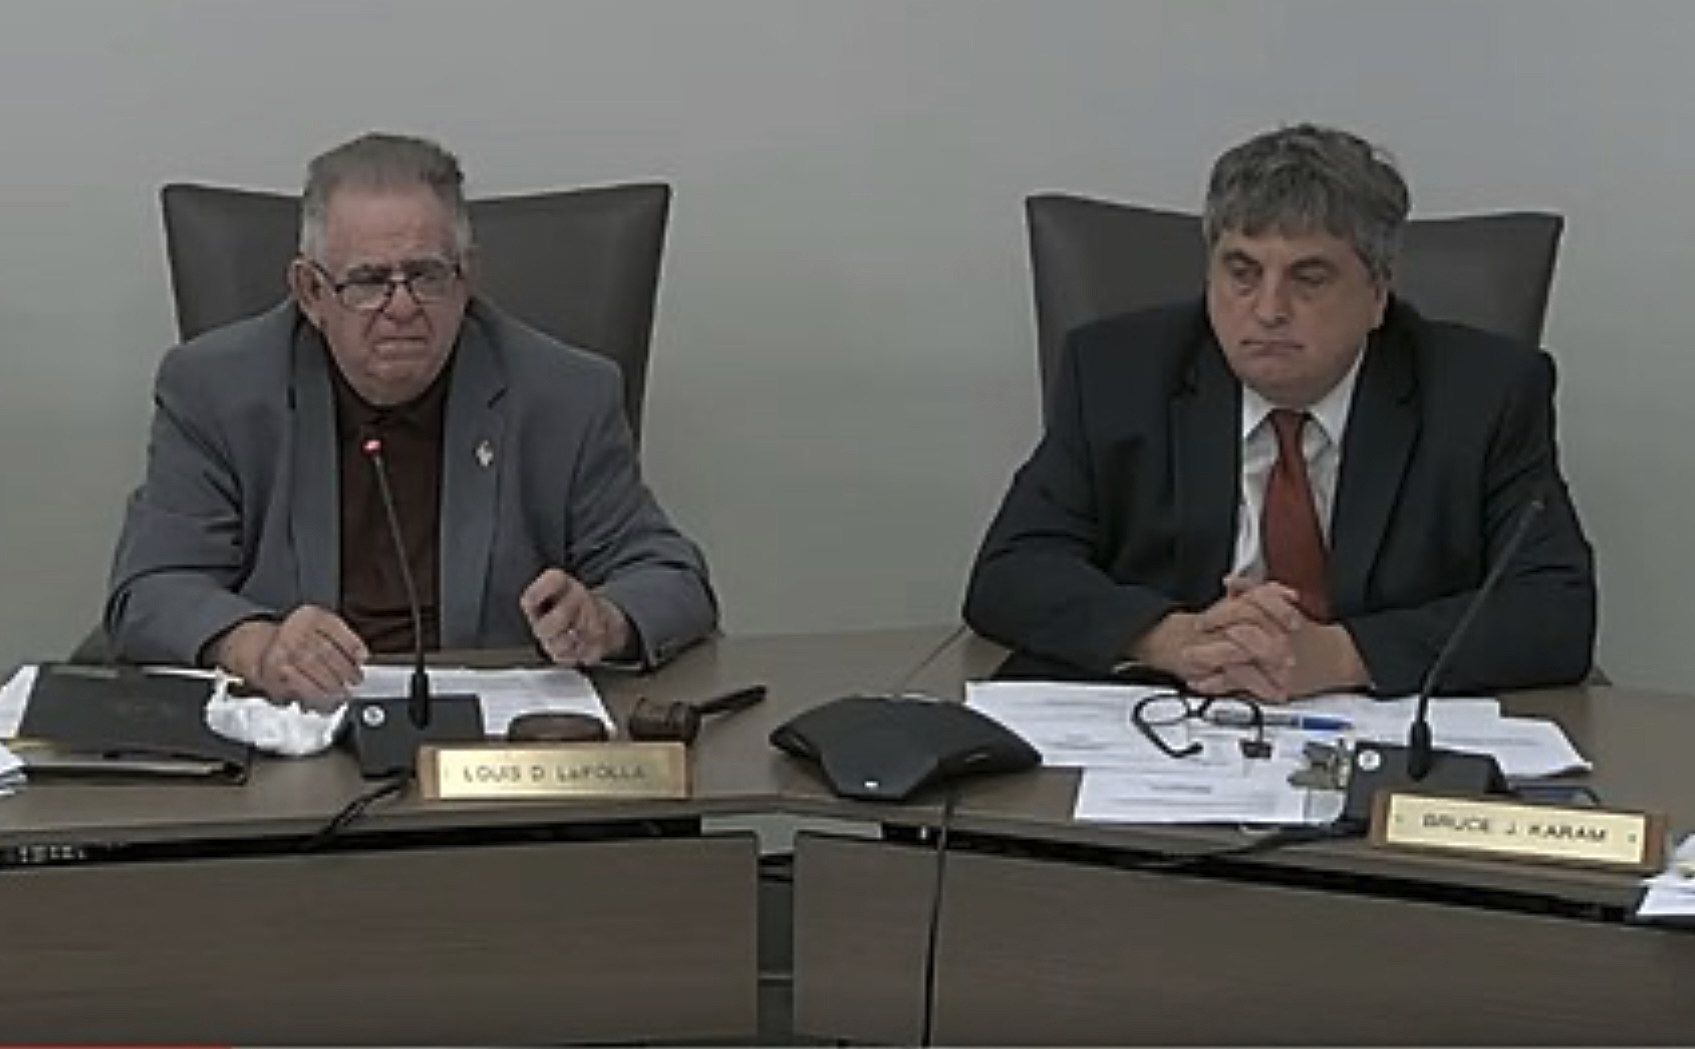 Former Utica School Board President Lou Lapolla and Superintendent Bruce Karam. (Photo from District Live Stream)